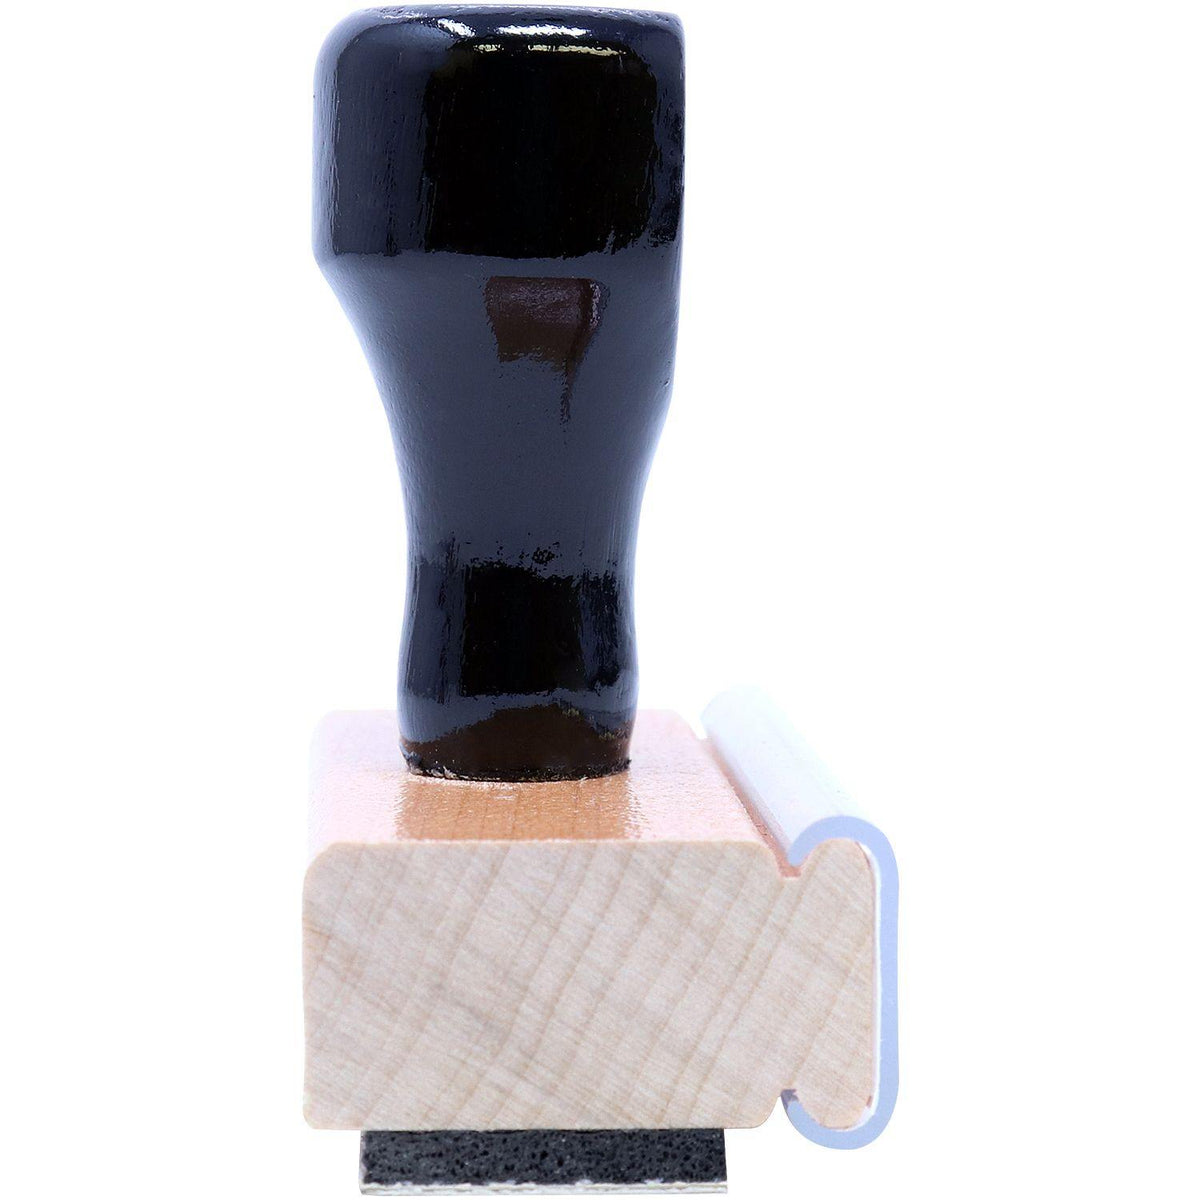 Large Vacant Rubber Stamp - Engineer Seal Stamps - Brand_Acorn, Impression Size_Large, Stamp Type_Regular Stamp, Type of Use_Office, Type of Use_Postal &amp; Mailing